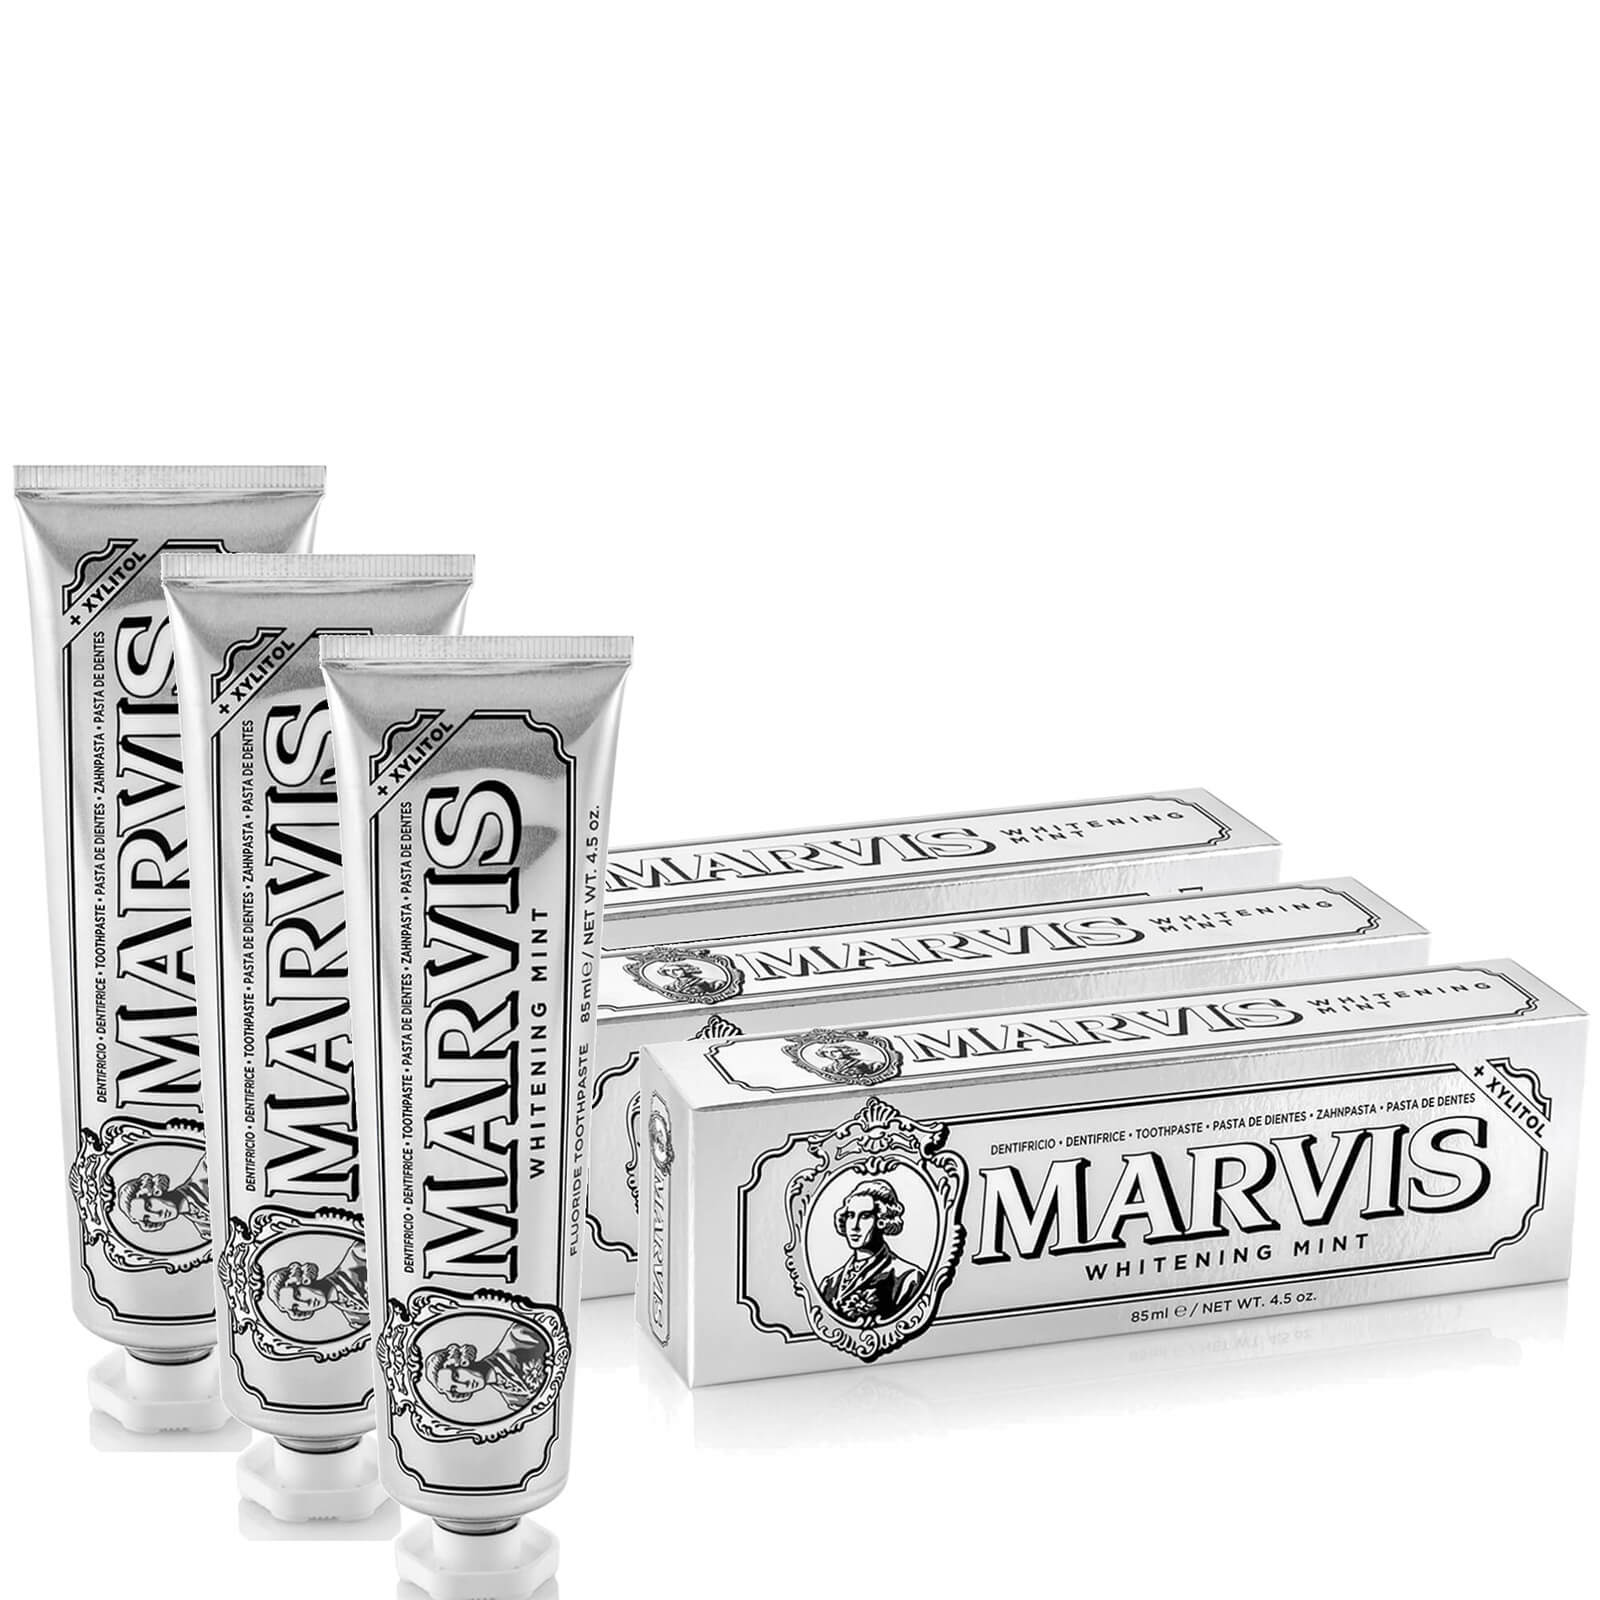 Marvis Whitening Mint Toothpaste Trio